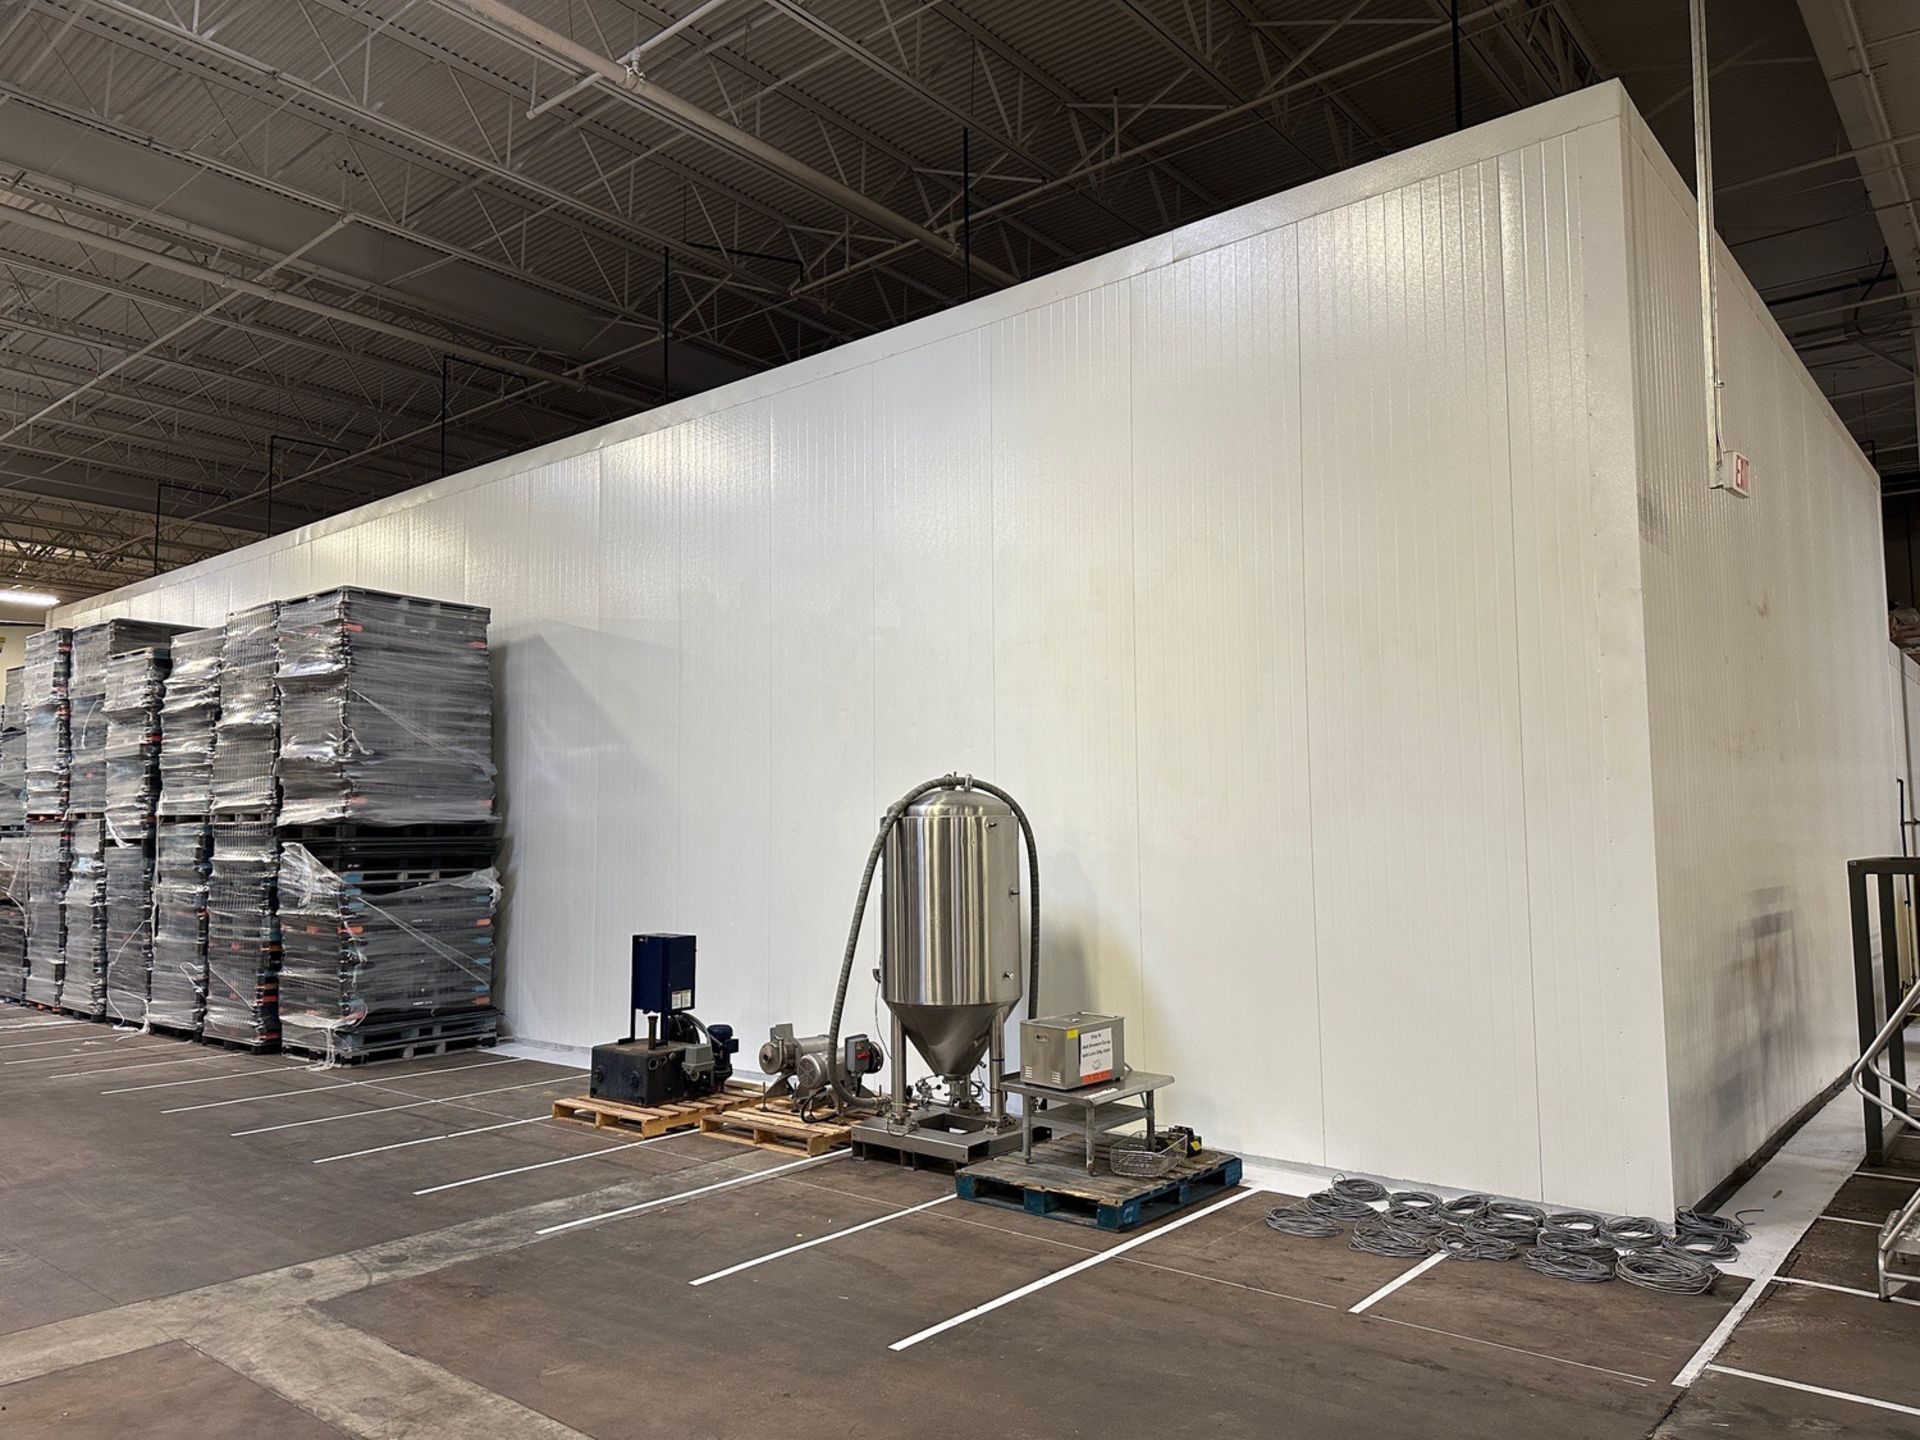 Cold Box - (3) Cooling Units - Shared Wall - (Approx. 32' x 77' x 18' - | Rig Fee $Contact Rigger - Image 2 of 14